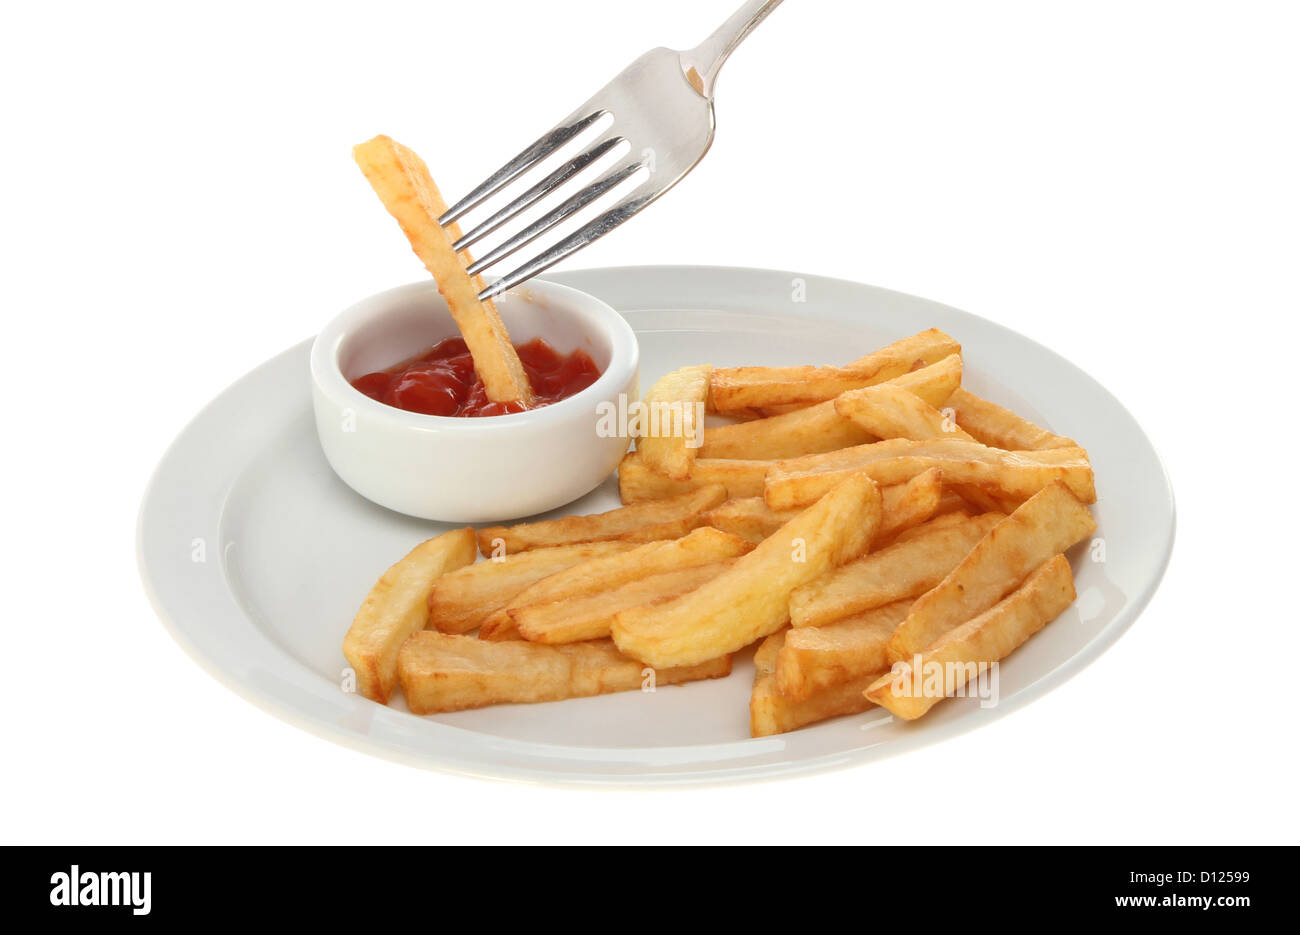 Potato chips on a plate with a chip on a fork dipping in ketchup isolated against white Stock Photo